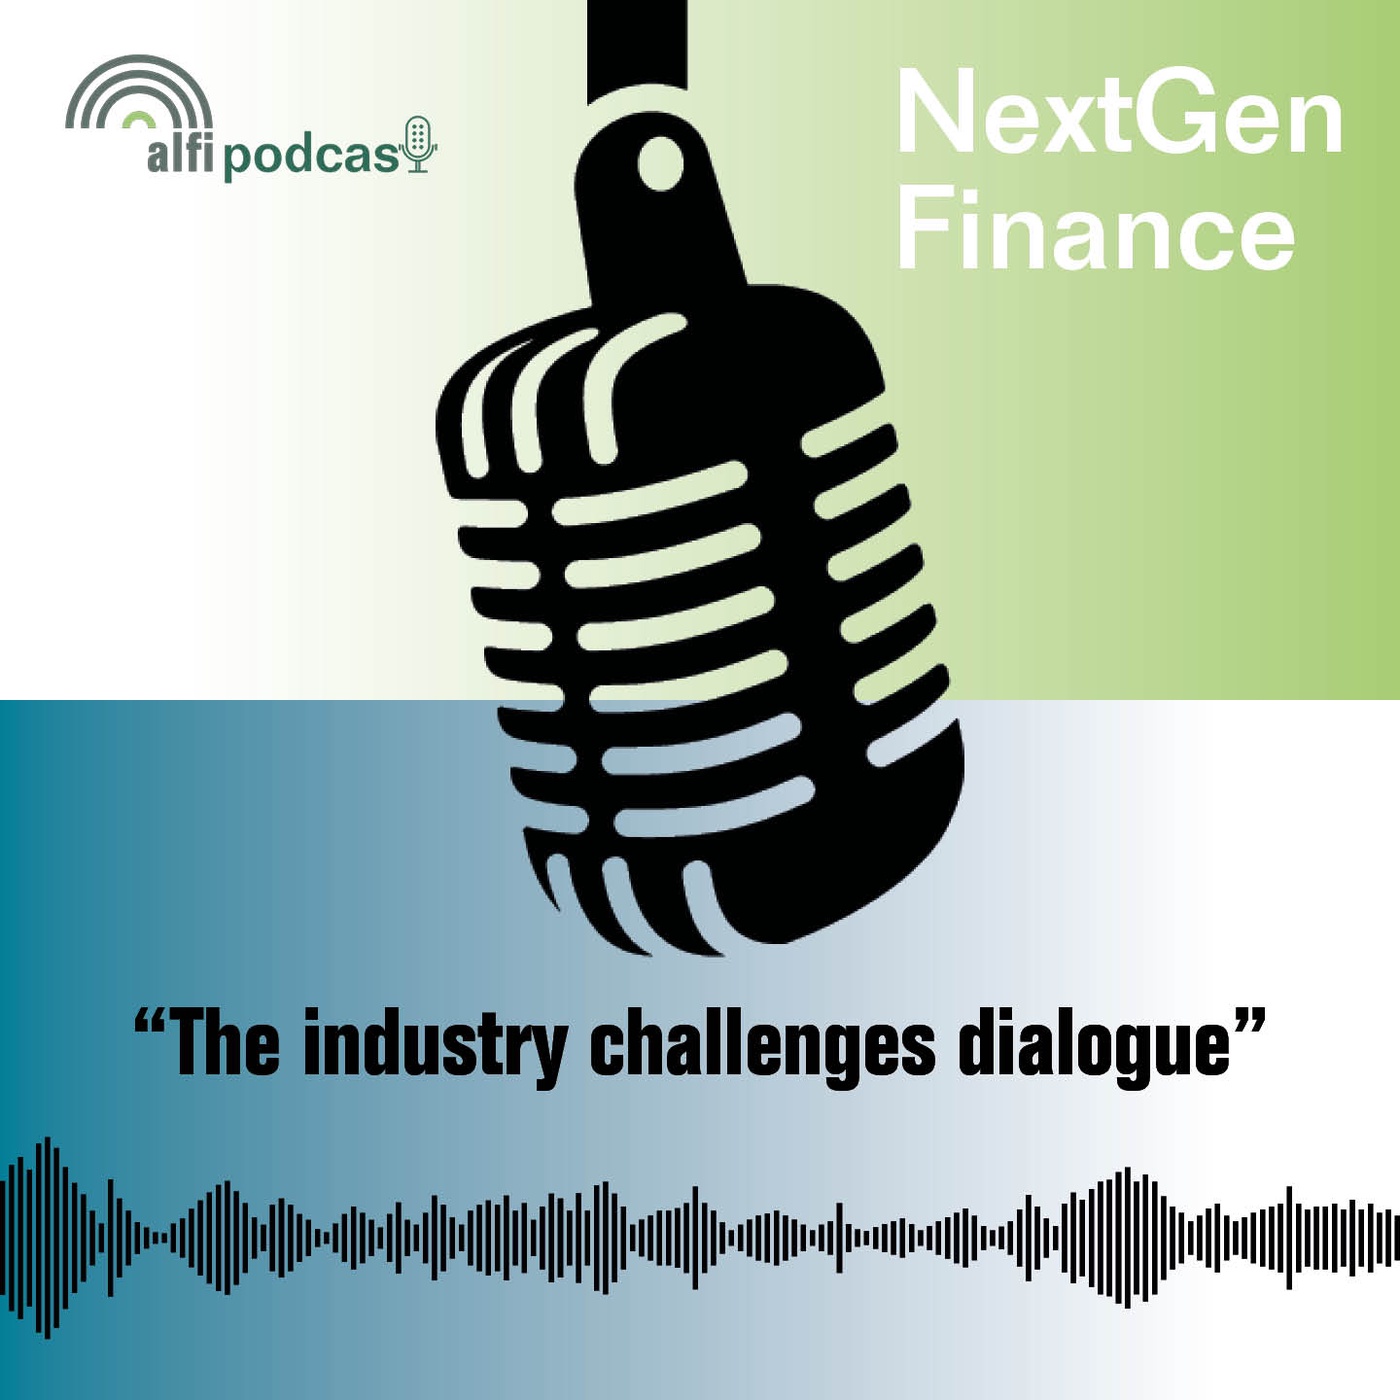 The industry challenges dialogue